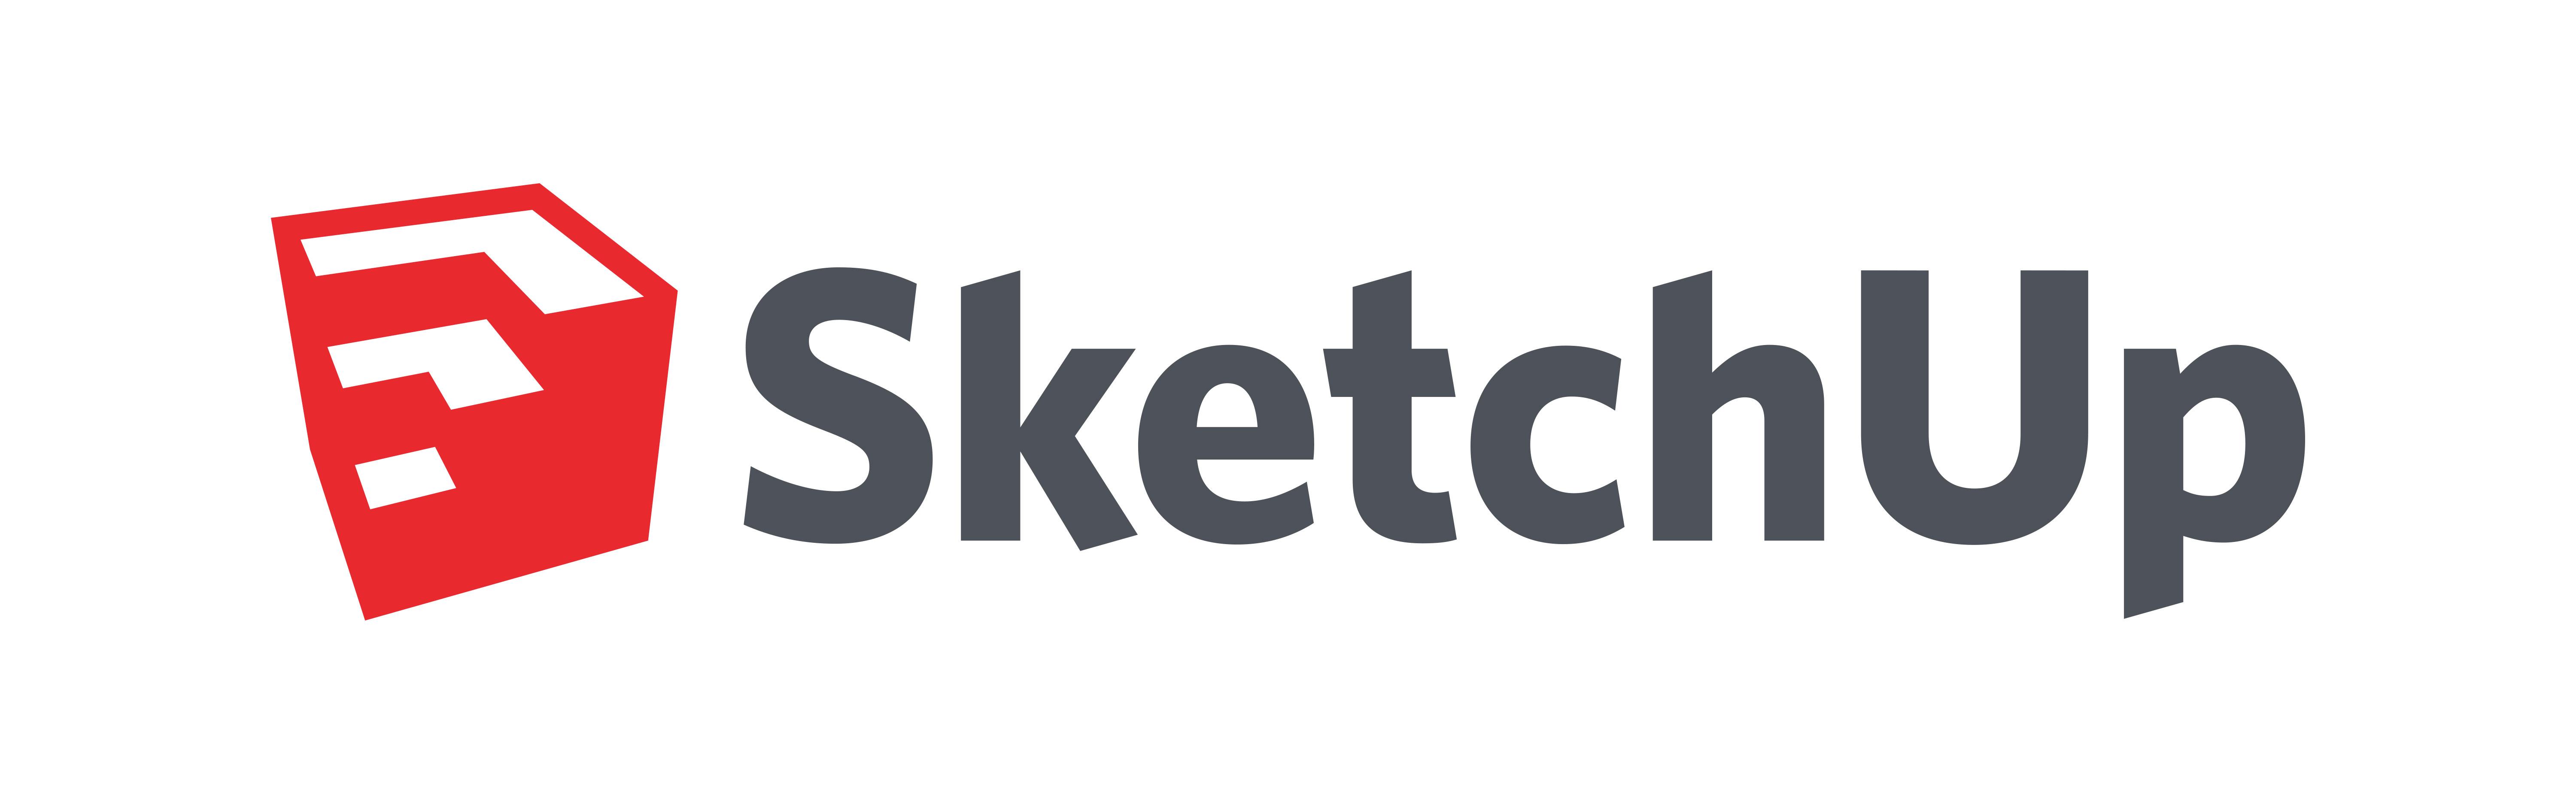 sketchup app rounded icon